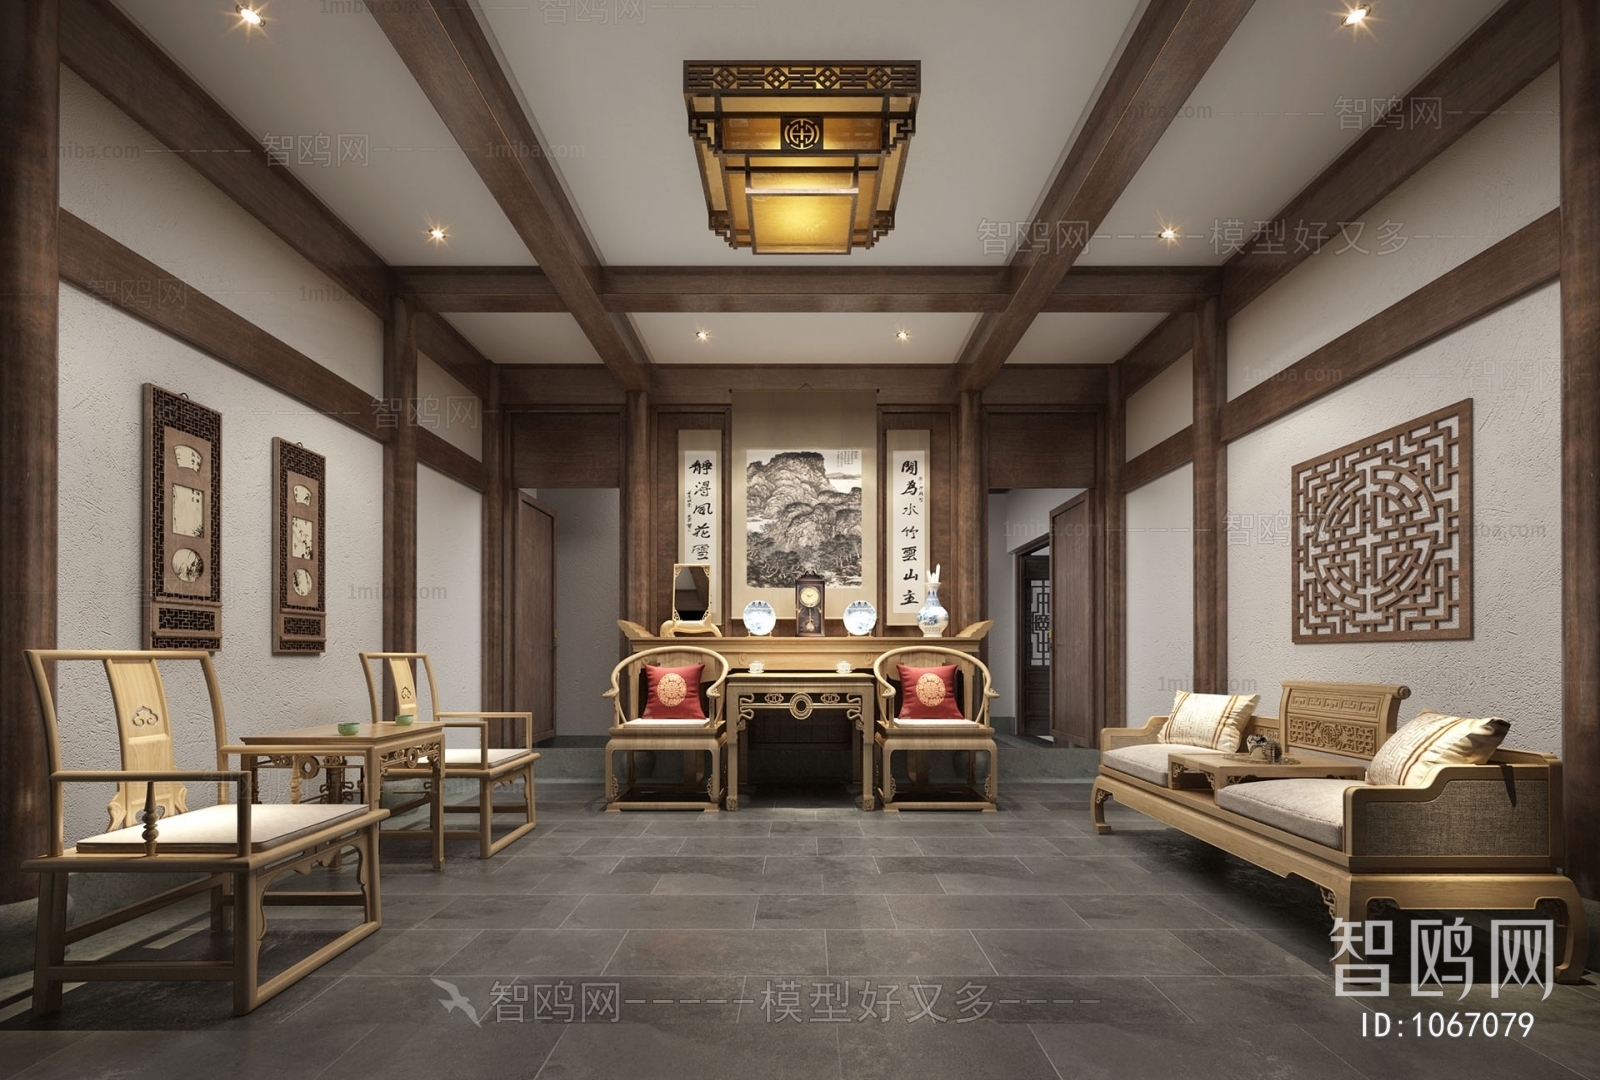 Chinese Style Meeting Room